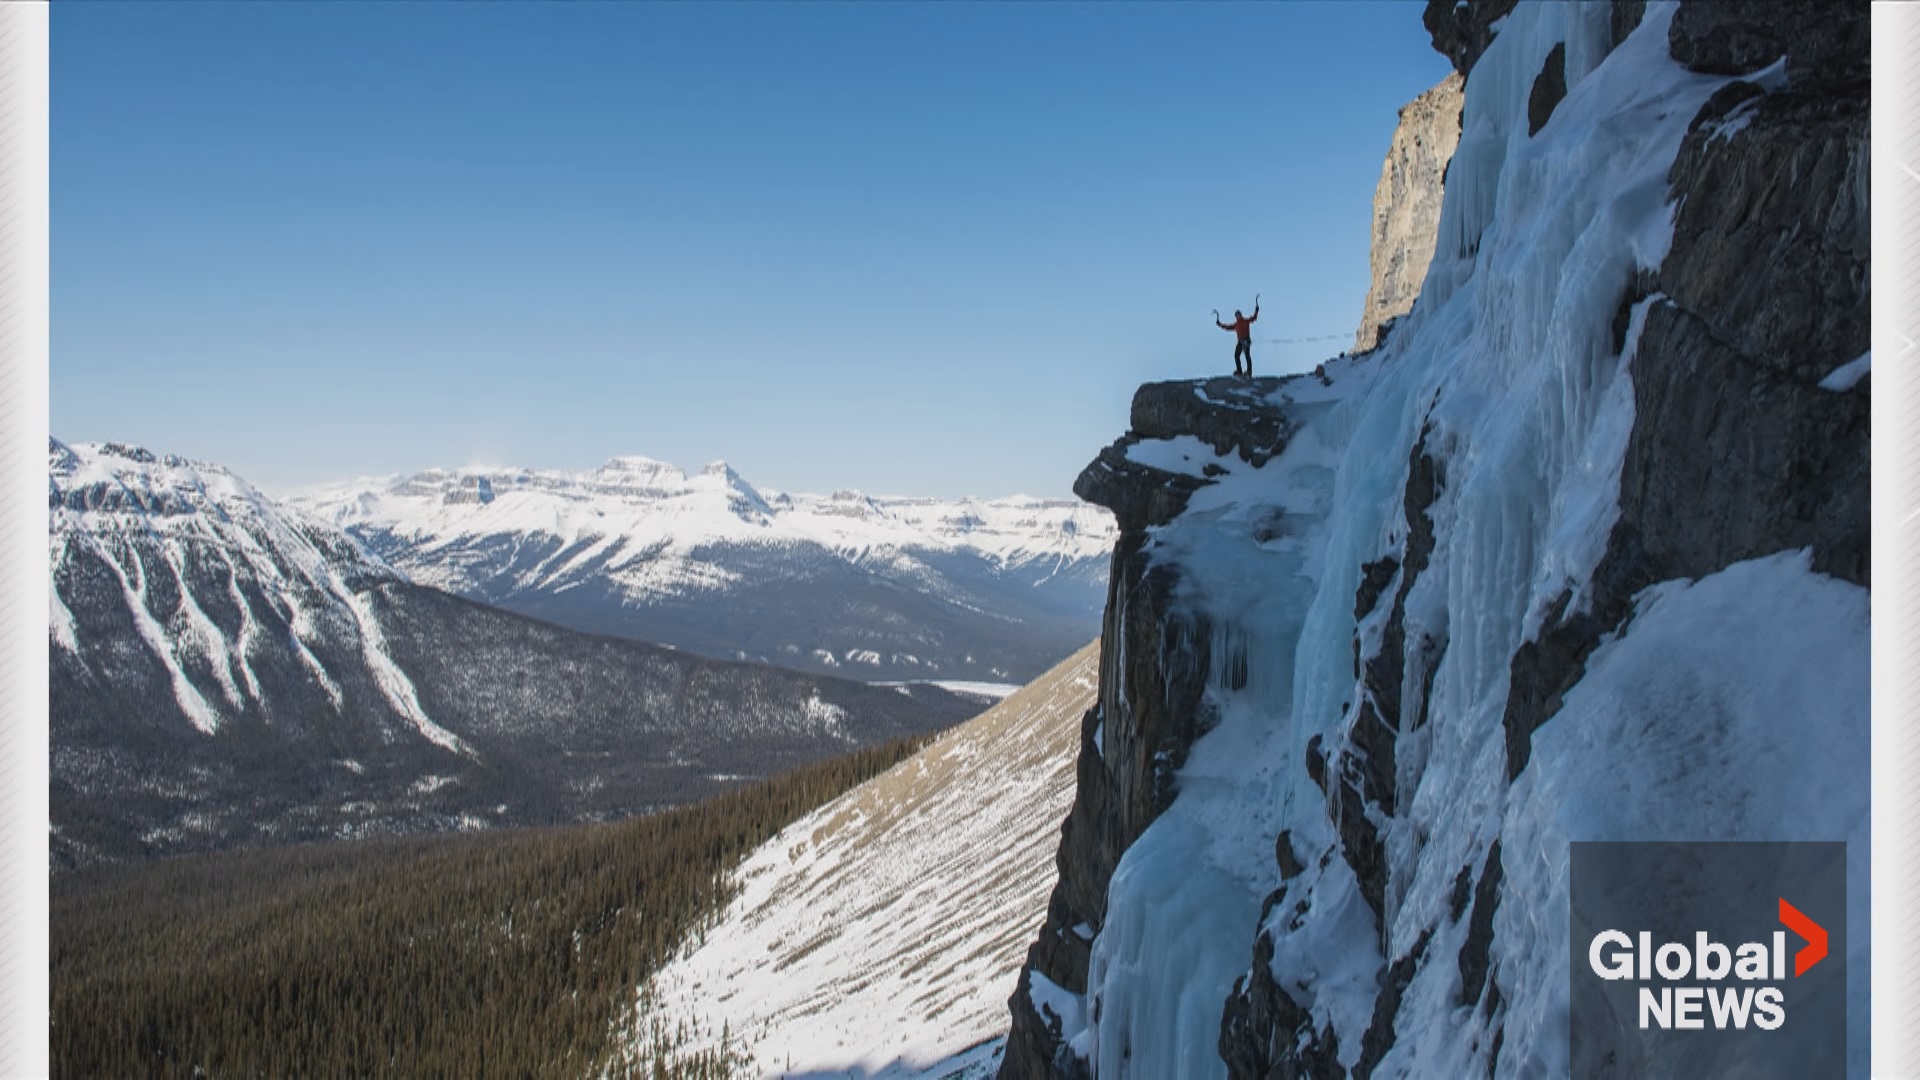 Legendary alpinists gather in Calgary for sudsy speaker series